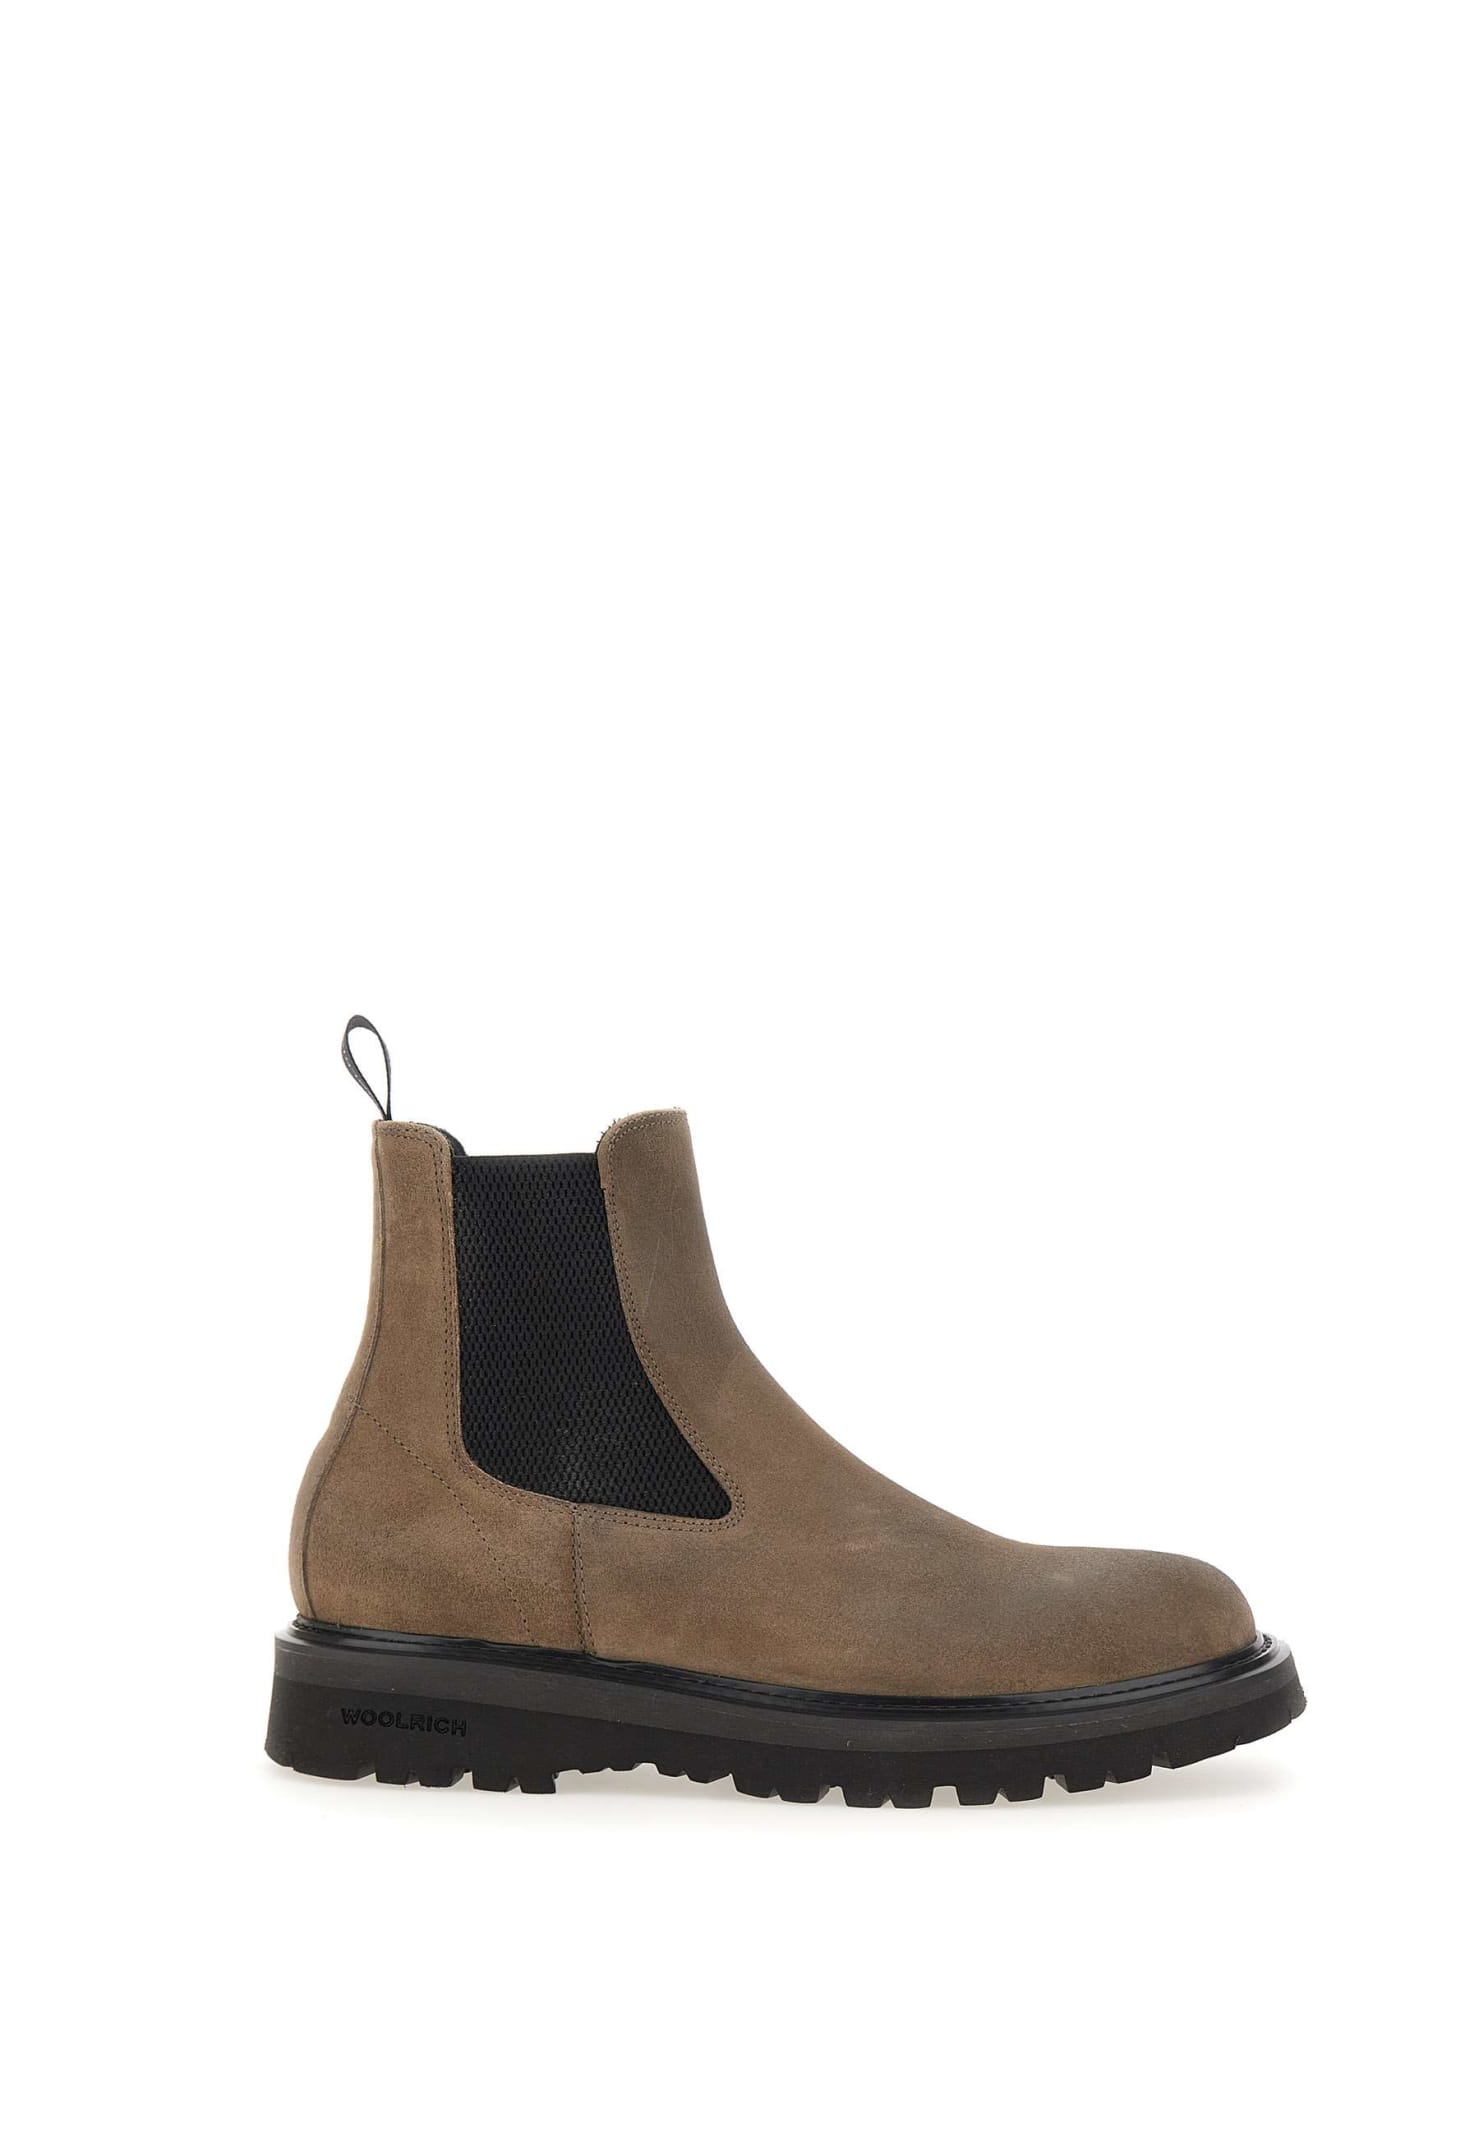 WOOLRICH CHELSEA NEW CITY LEATHER BOOTS